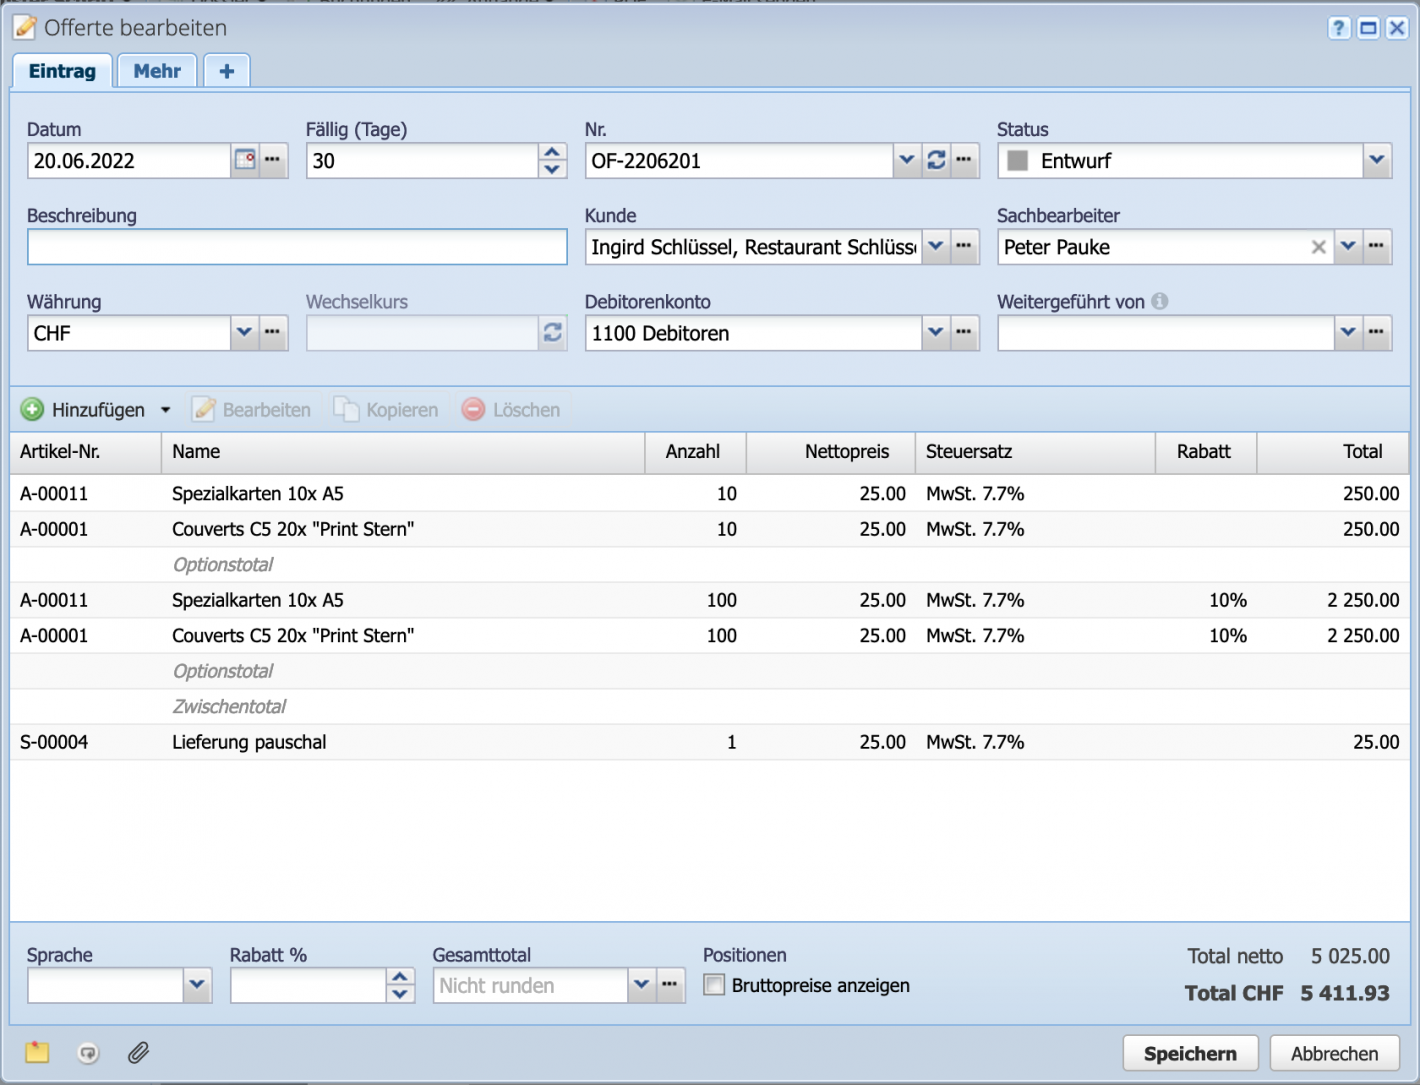 Screenshot of an offer with many positions and inserted option totals and subtotals